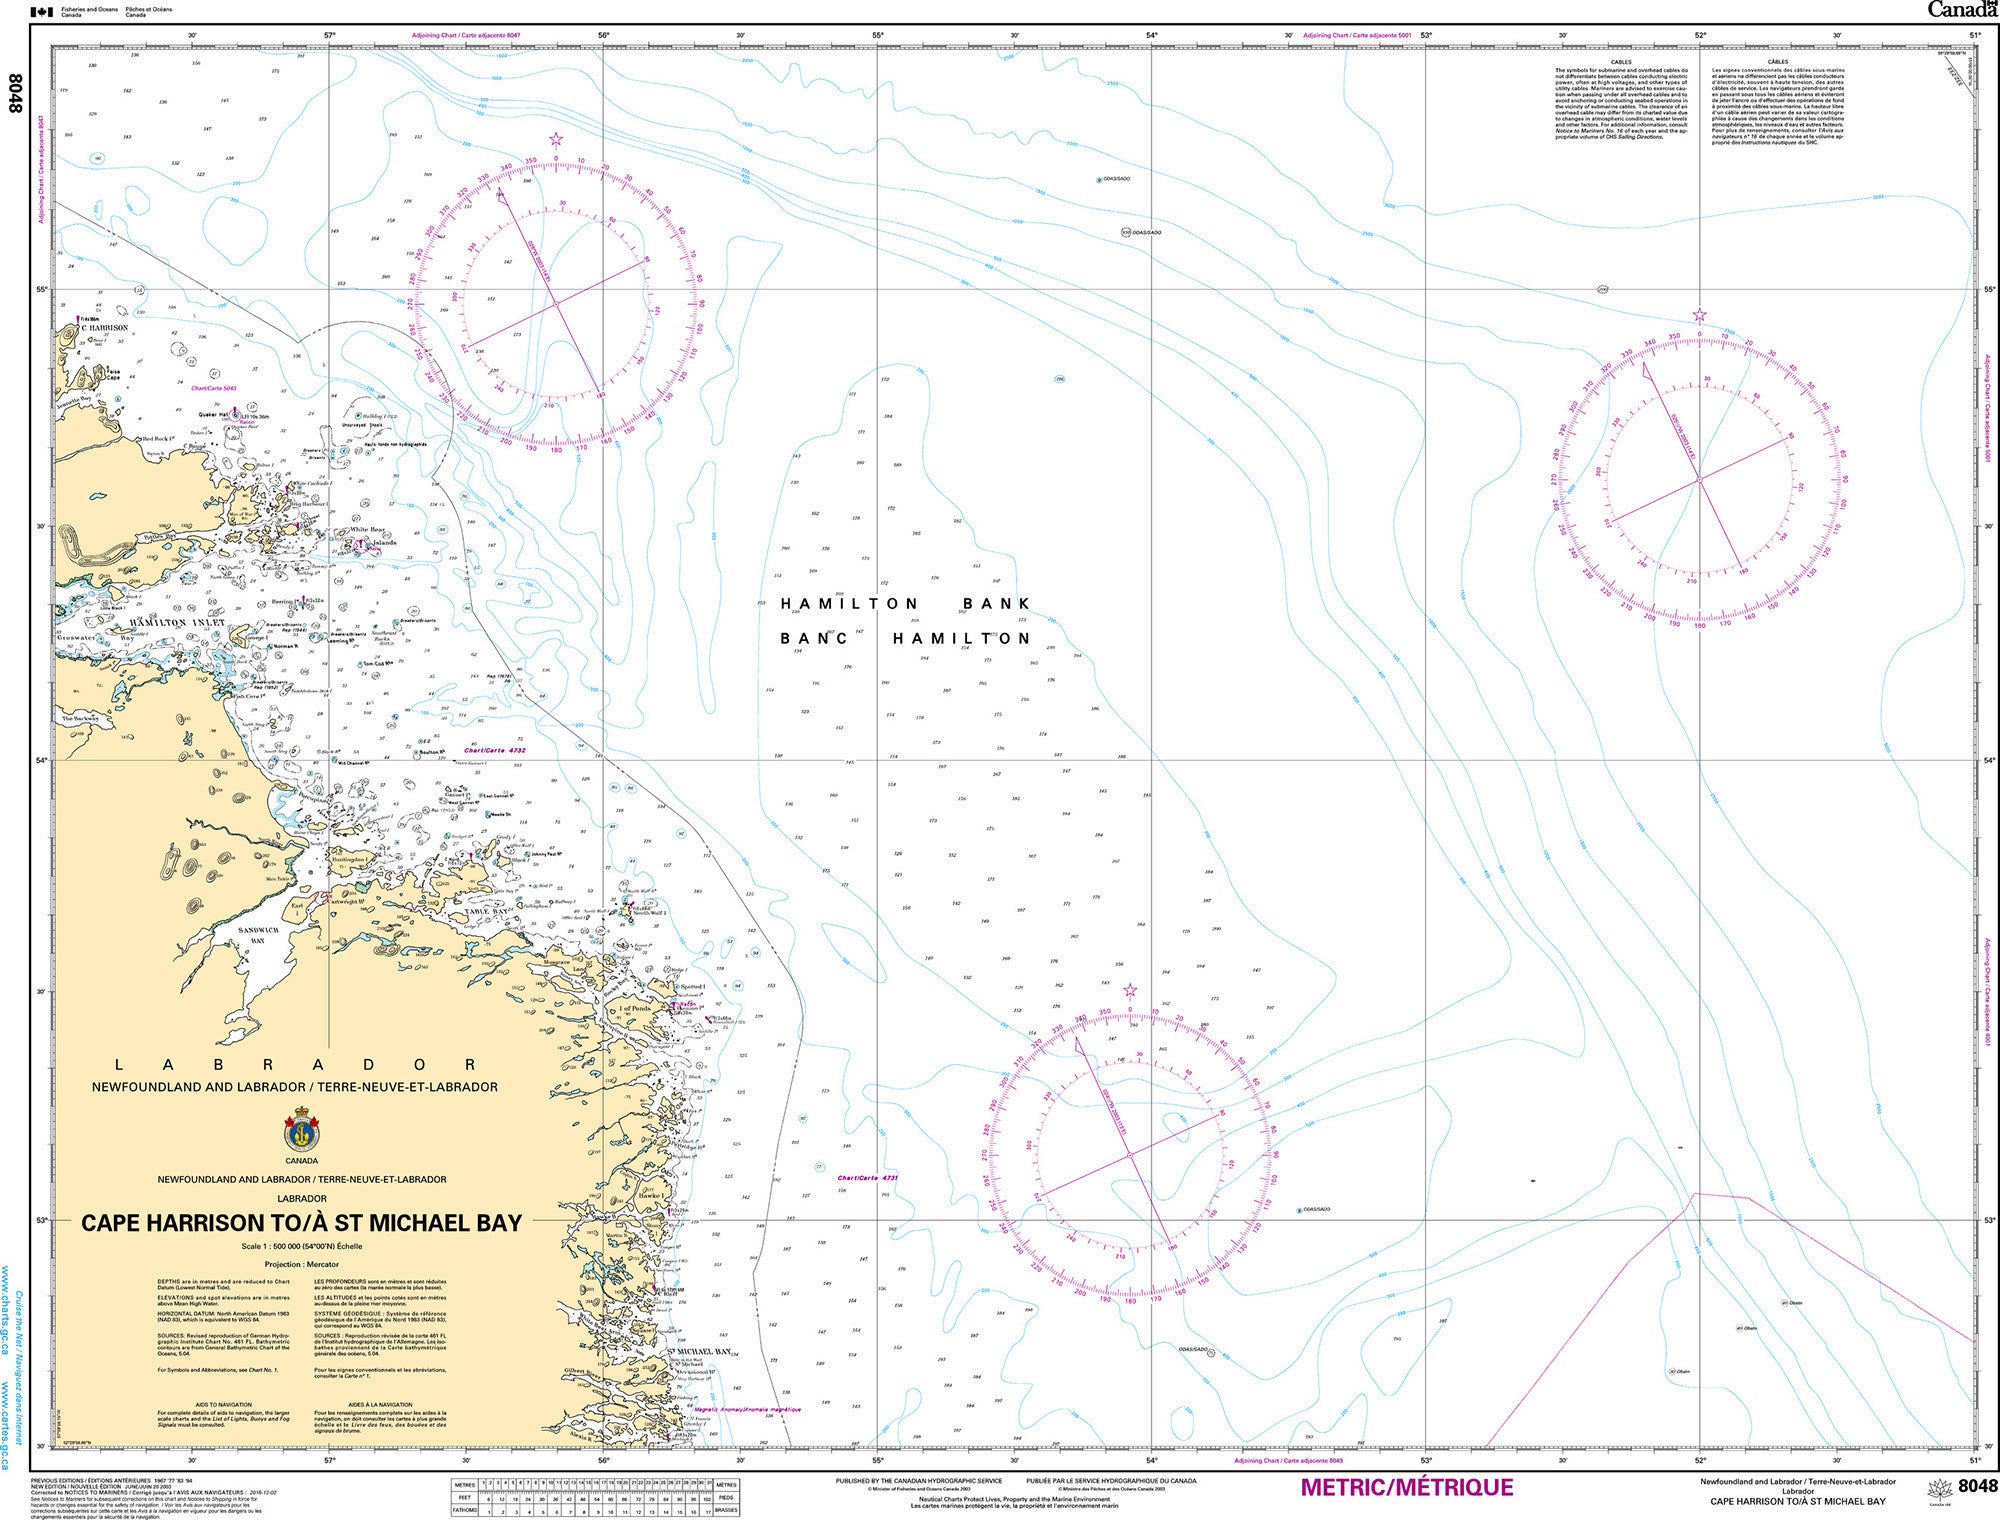 Canadian Hydrographic Service Nautical Chart CHS8048: Cape Harrison to/à St. Michael Bay